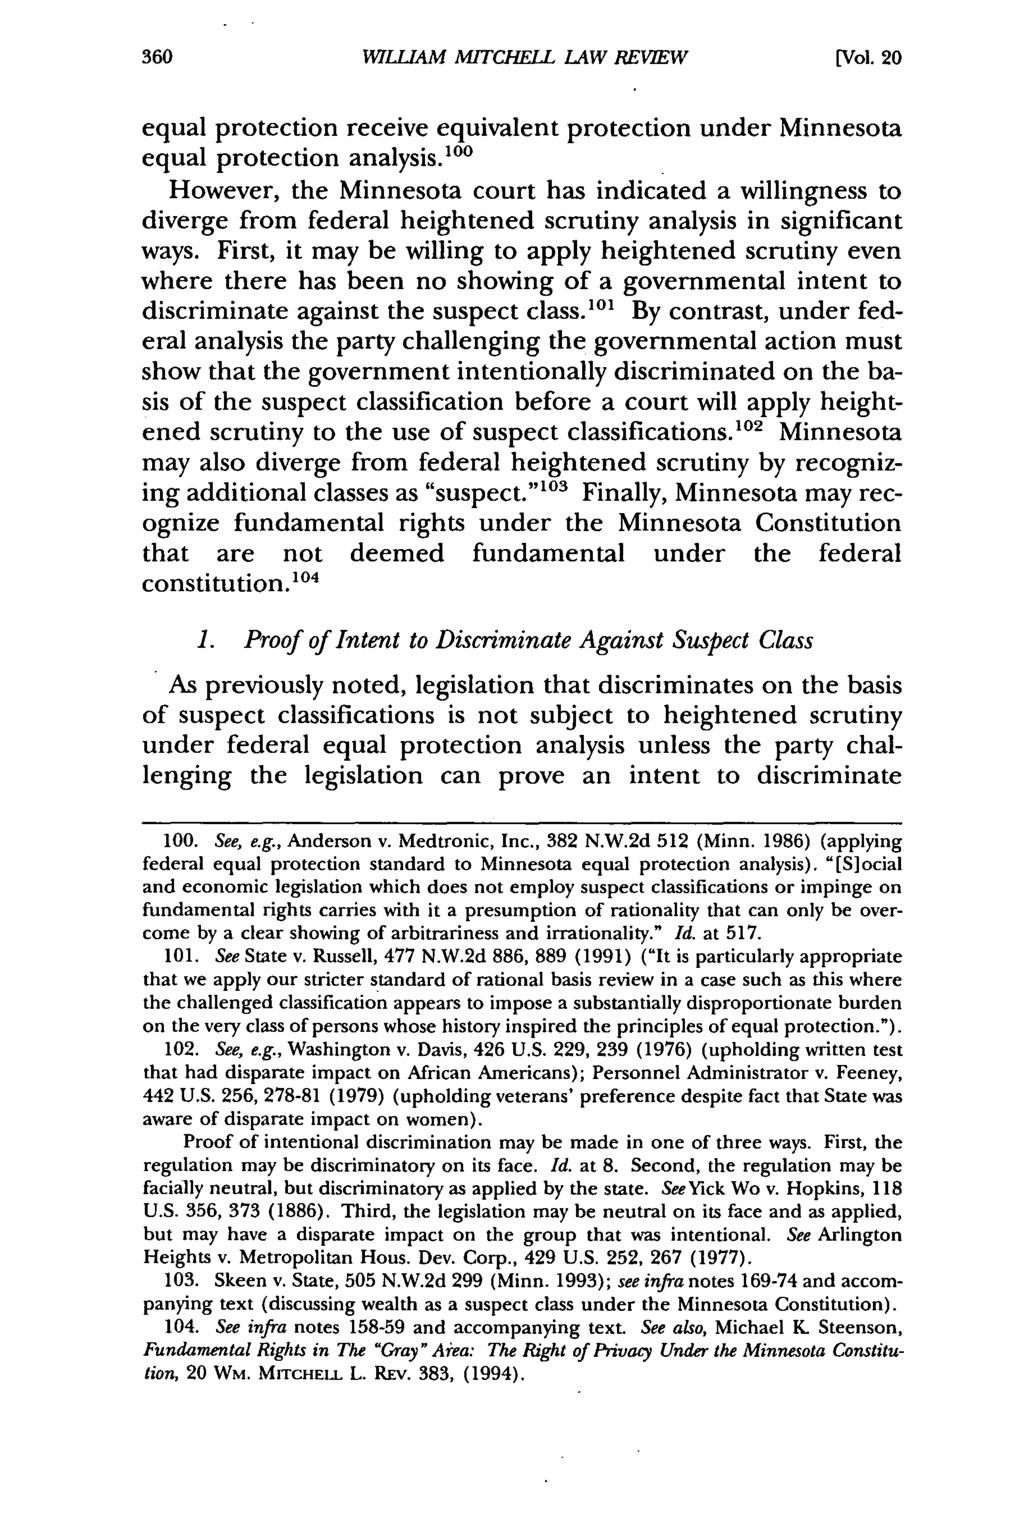 William Mitchell WILLIAM Law MITCHELL Review, Vol. 20, LAW Iss. 2 REVIEW [1994], Art. 5 [Vol. 20 equal protection receive equivalent protection under Minnesota equal protection analysis.